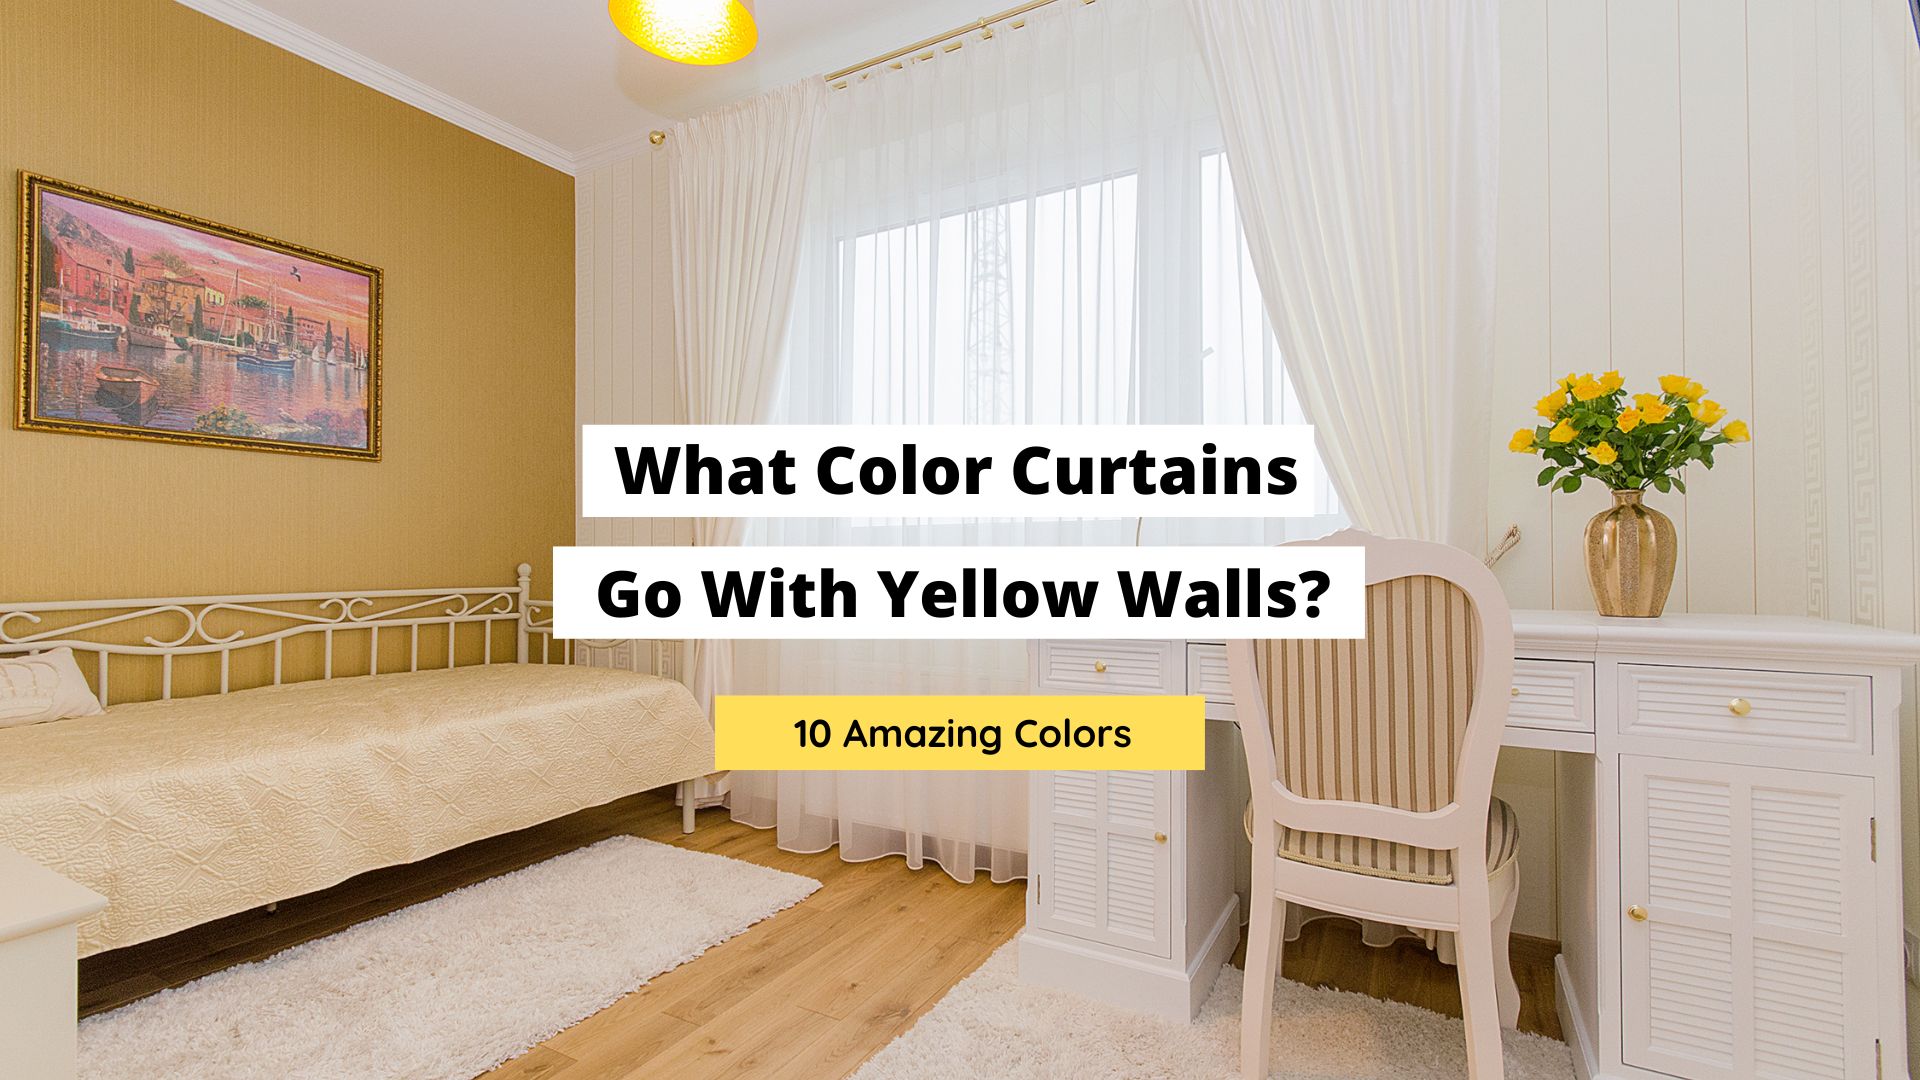 Great Barrier Reef magasin olie What Color Curtains Go With Yellow Walls? (10 Options) - Craftsonfire